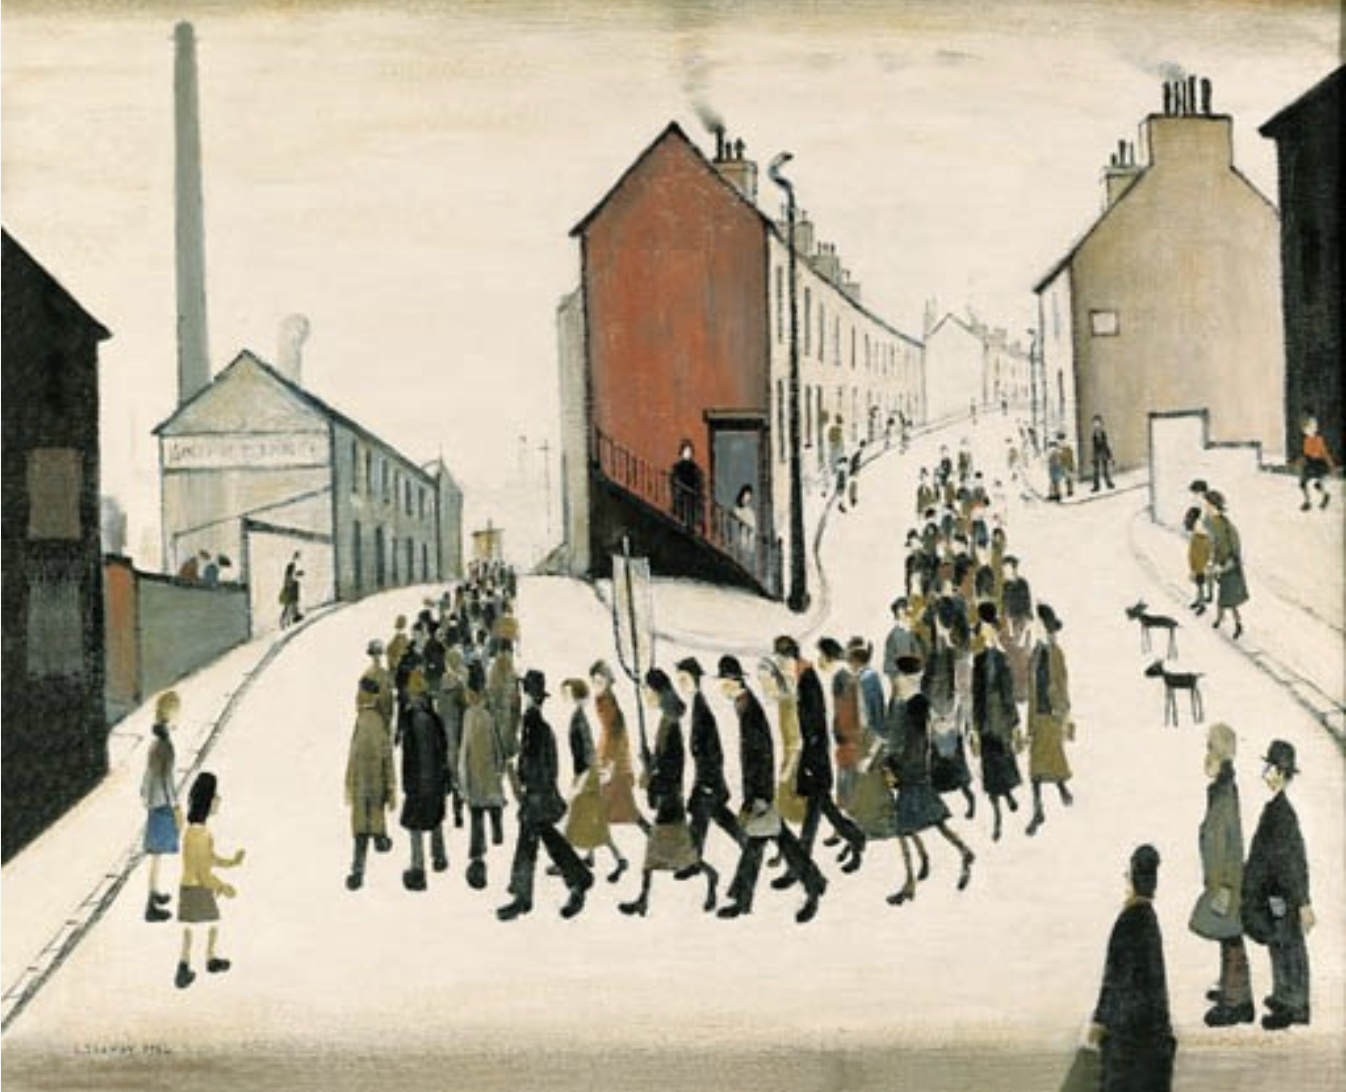 A Procession in Manchester (1954) by Laurence Stephen Lowry (1887 - 1976), English artist.